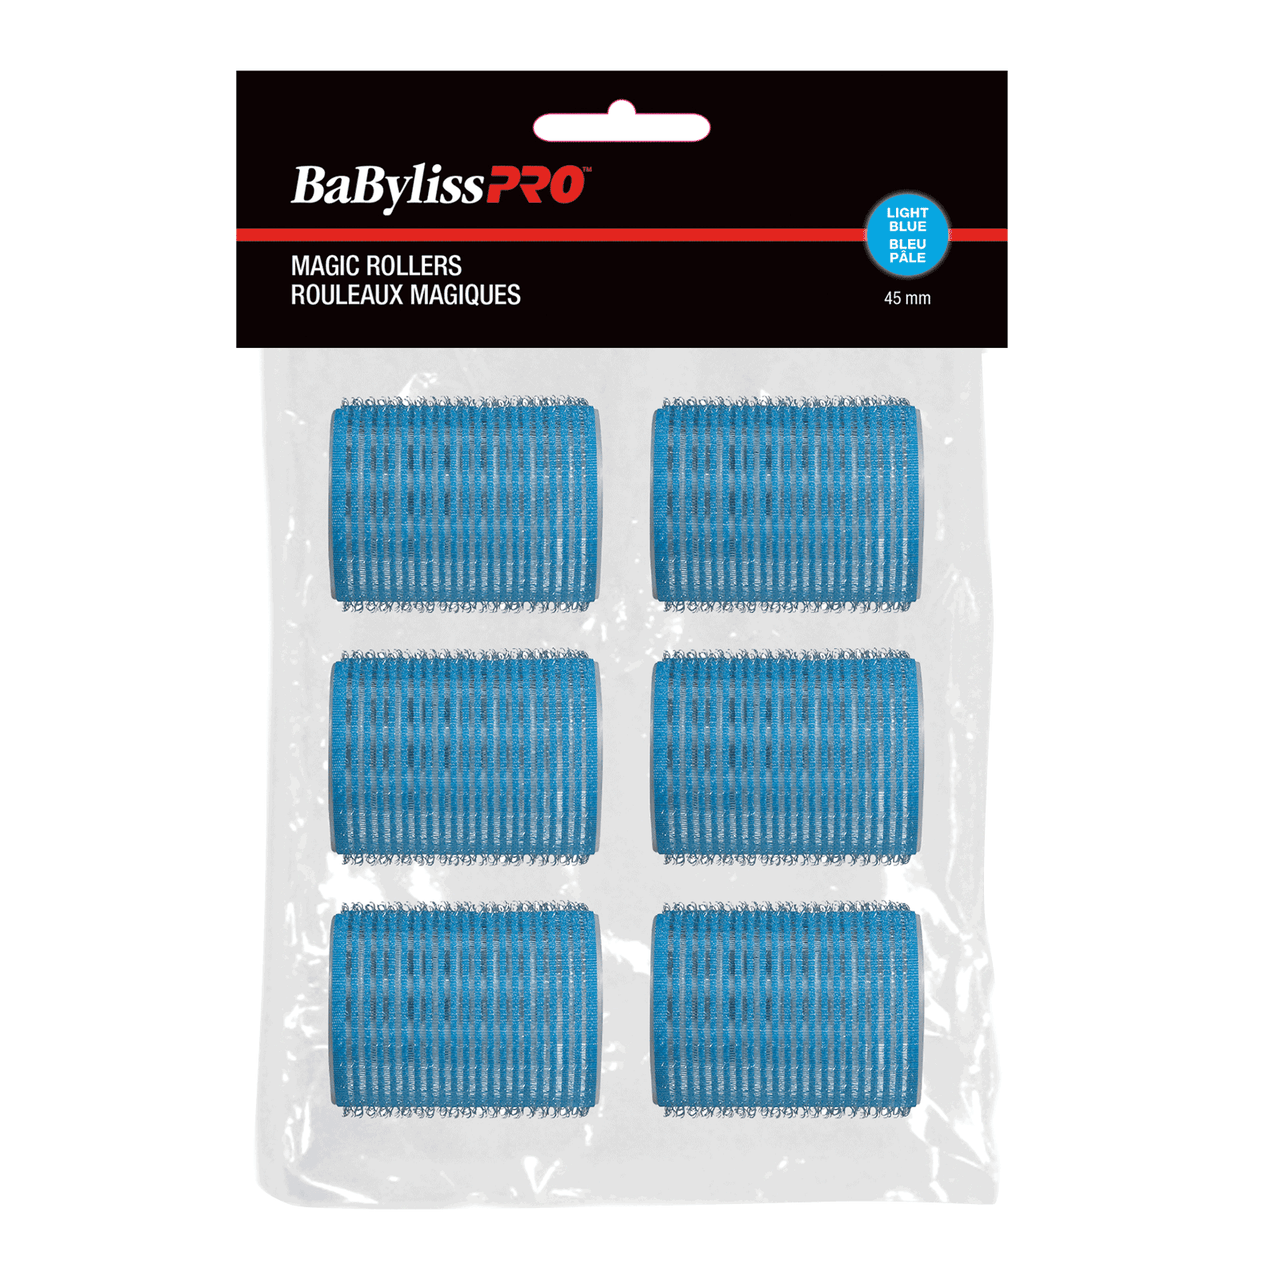 Dannyco Sundries BaByliss Pro Self Gripping Magic Rollers - 6 Pack